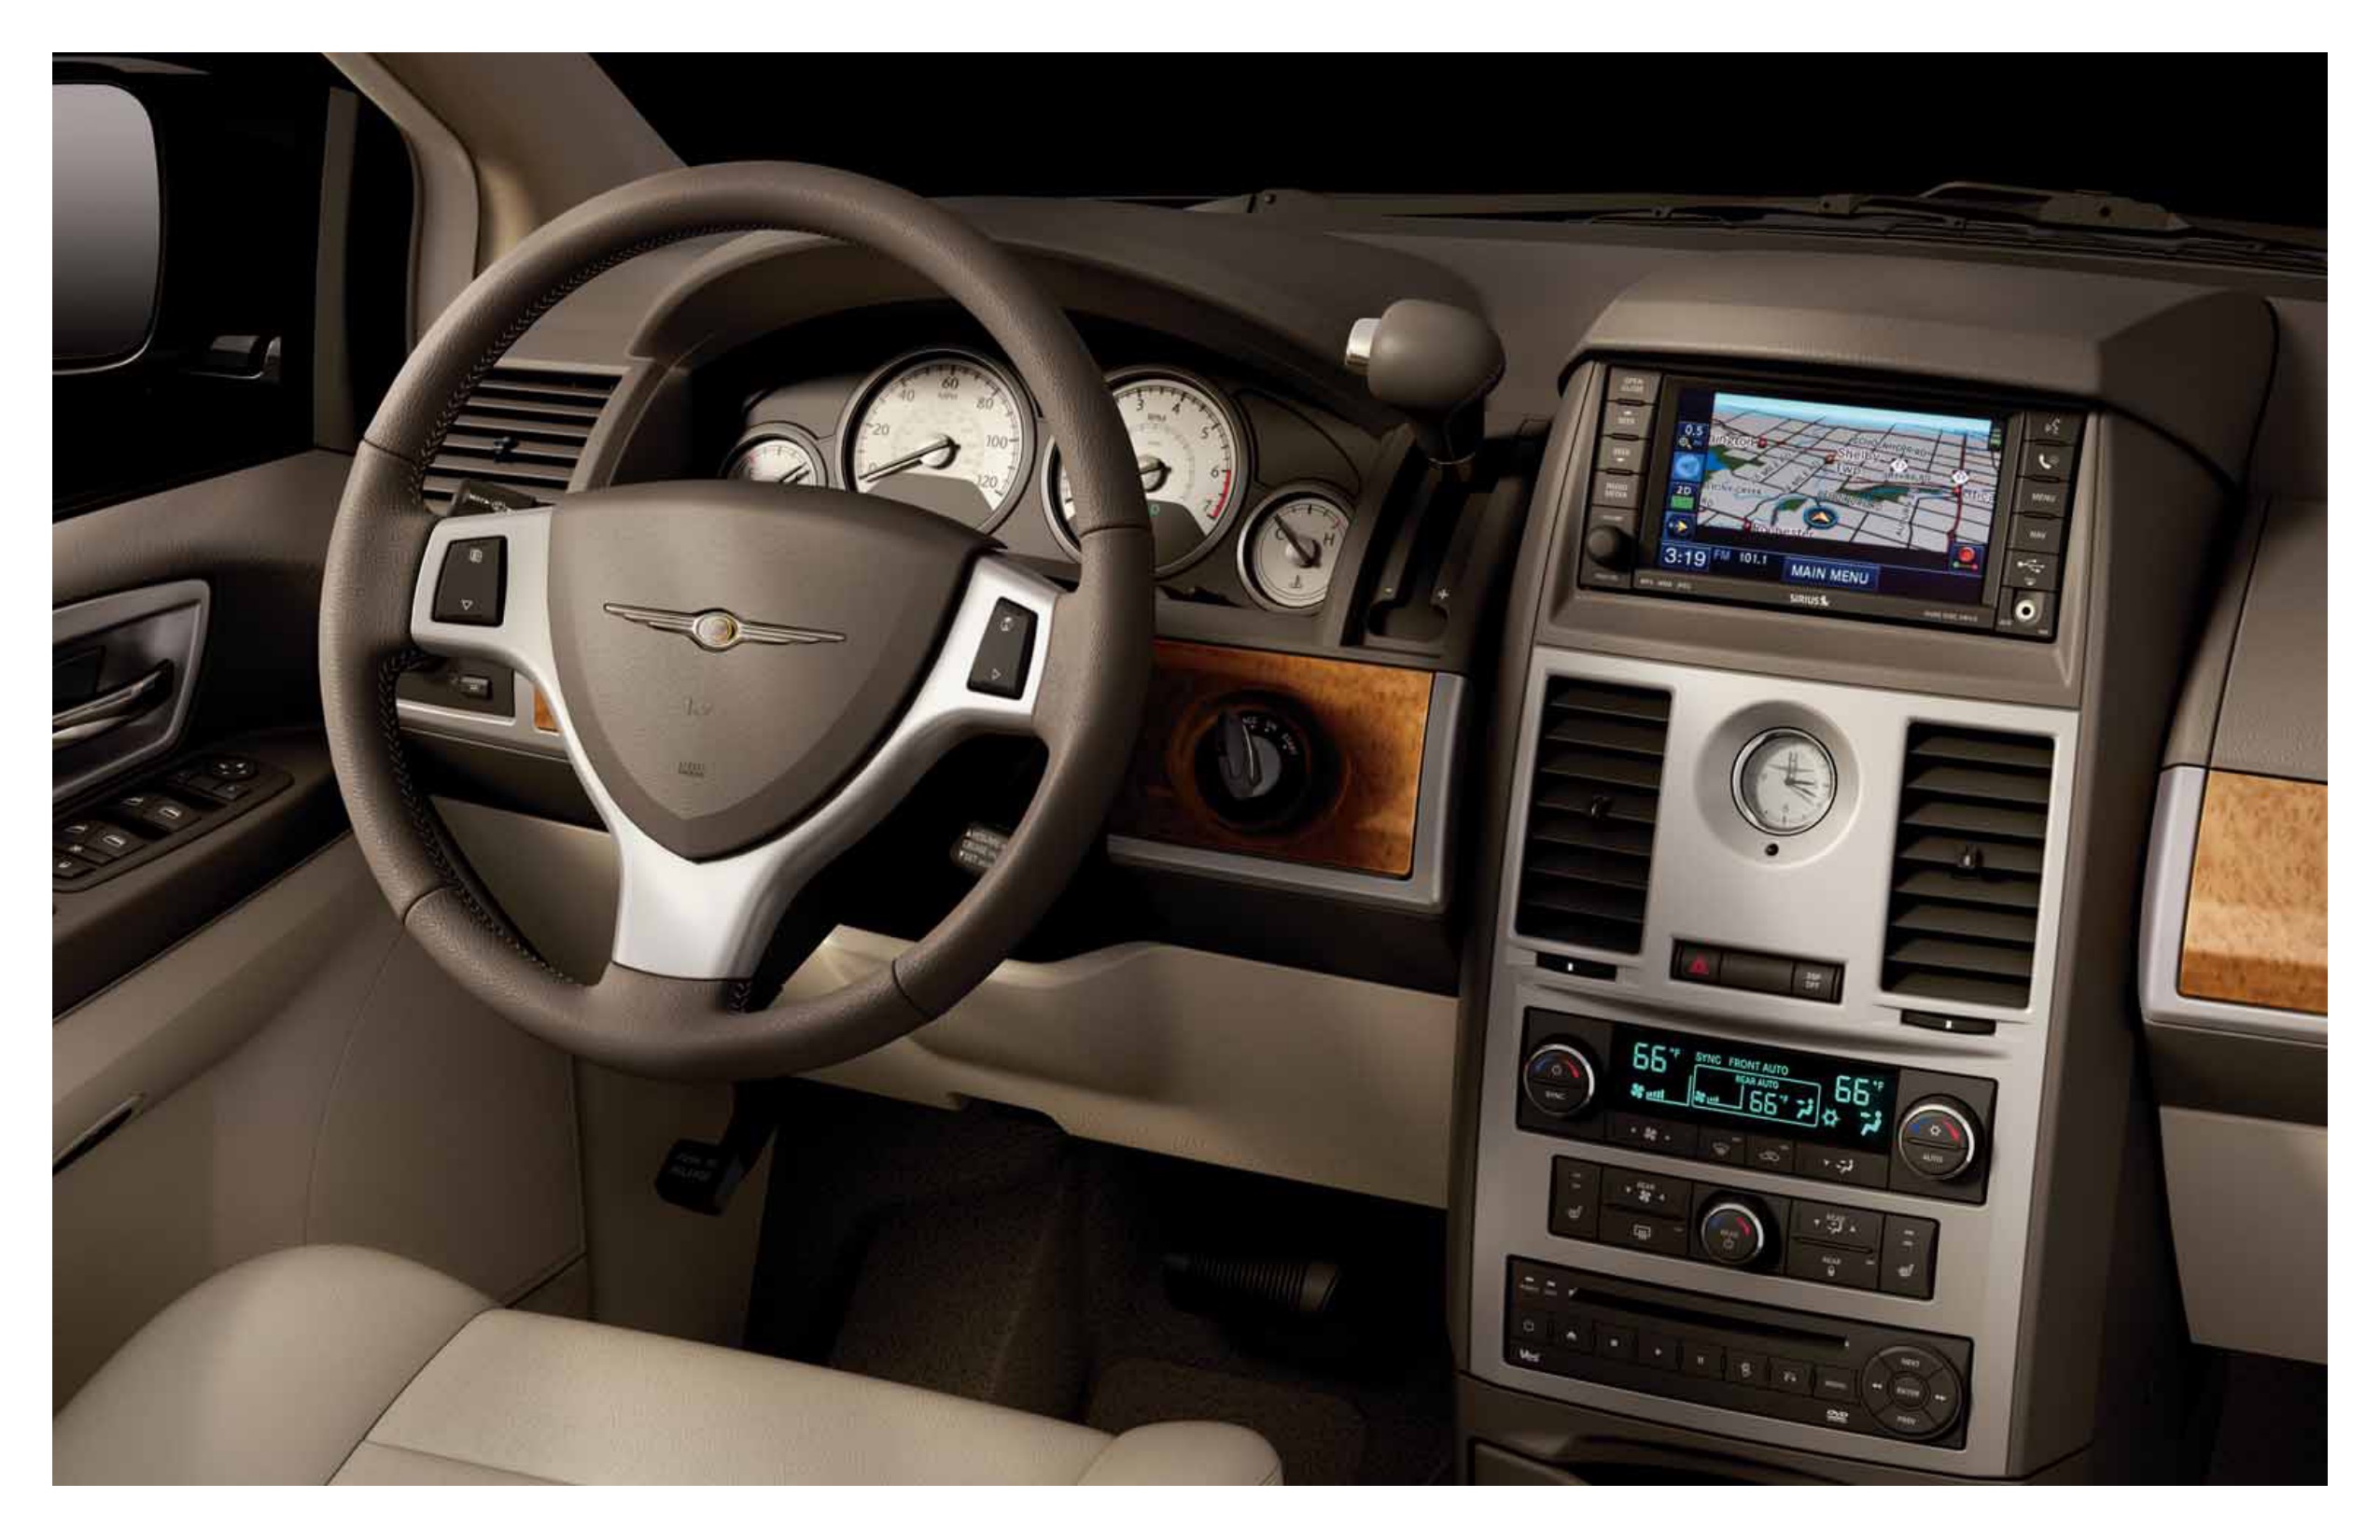 2010 Chrysler Town & Country Brochure Page 22